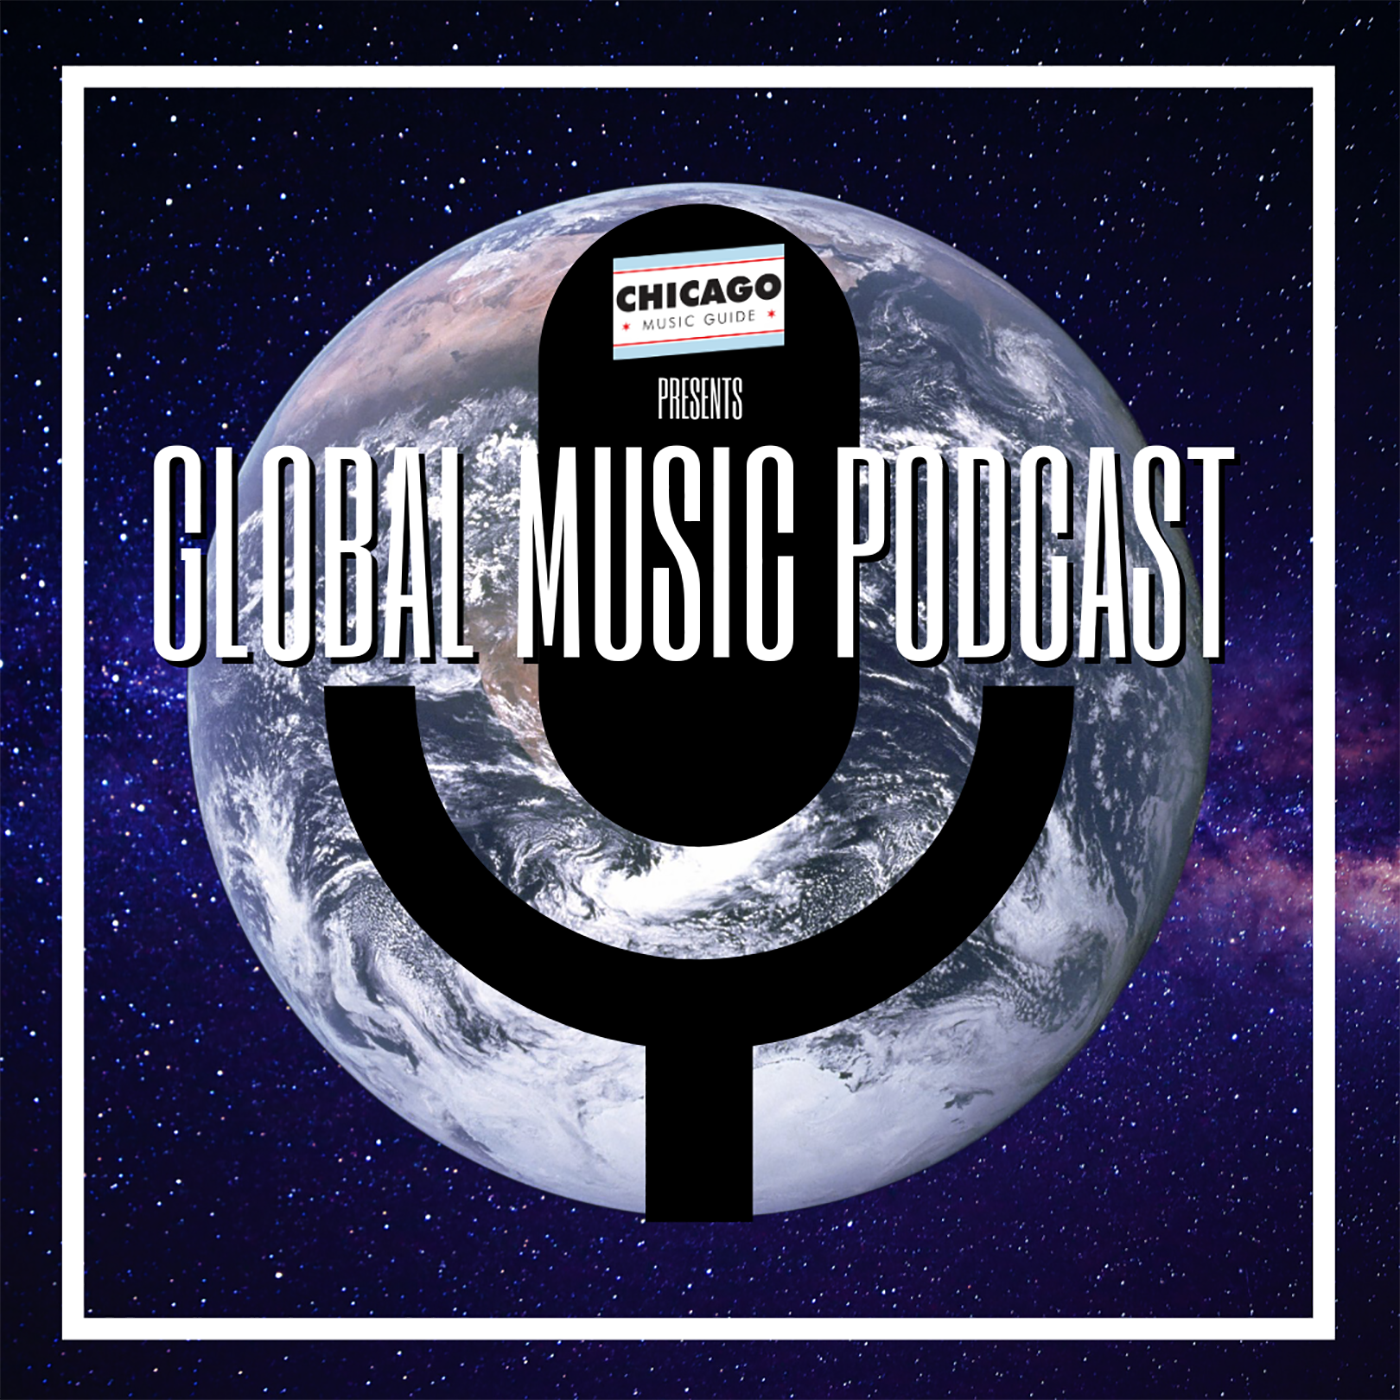 Global Music Podcast